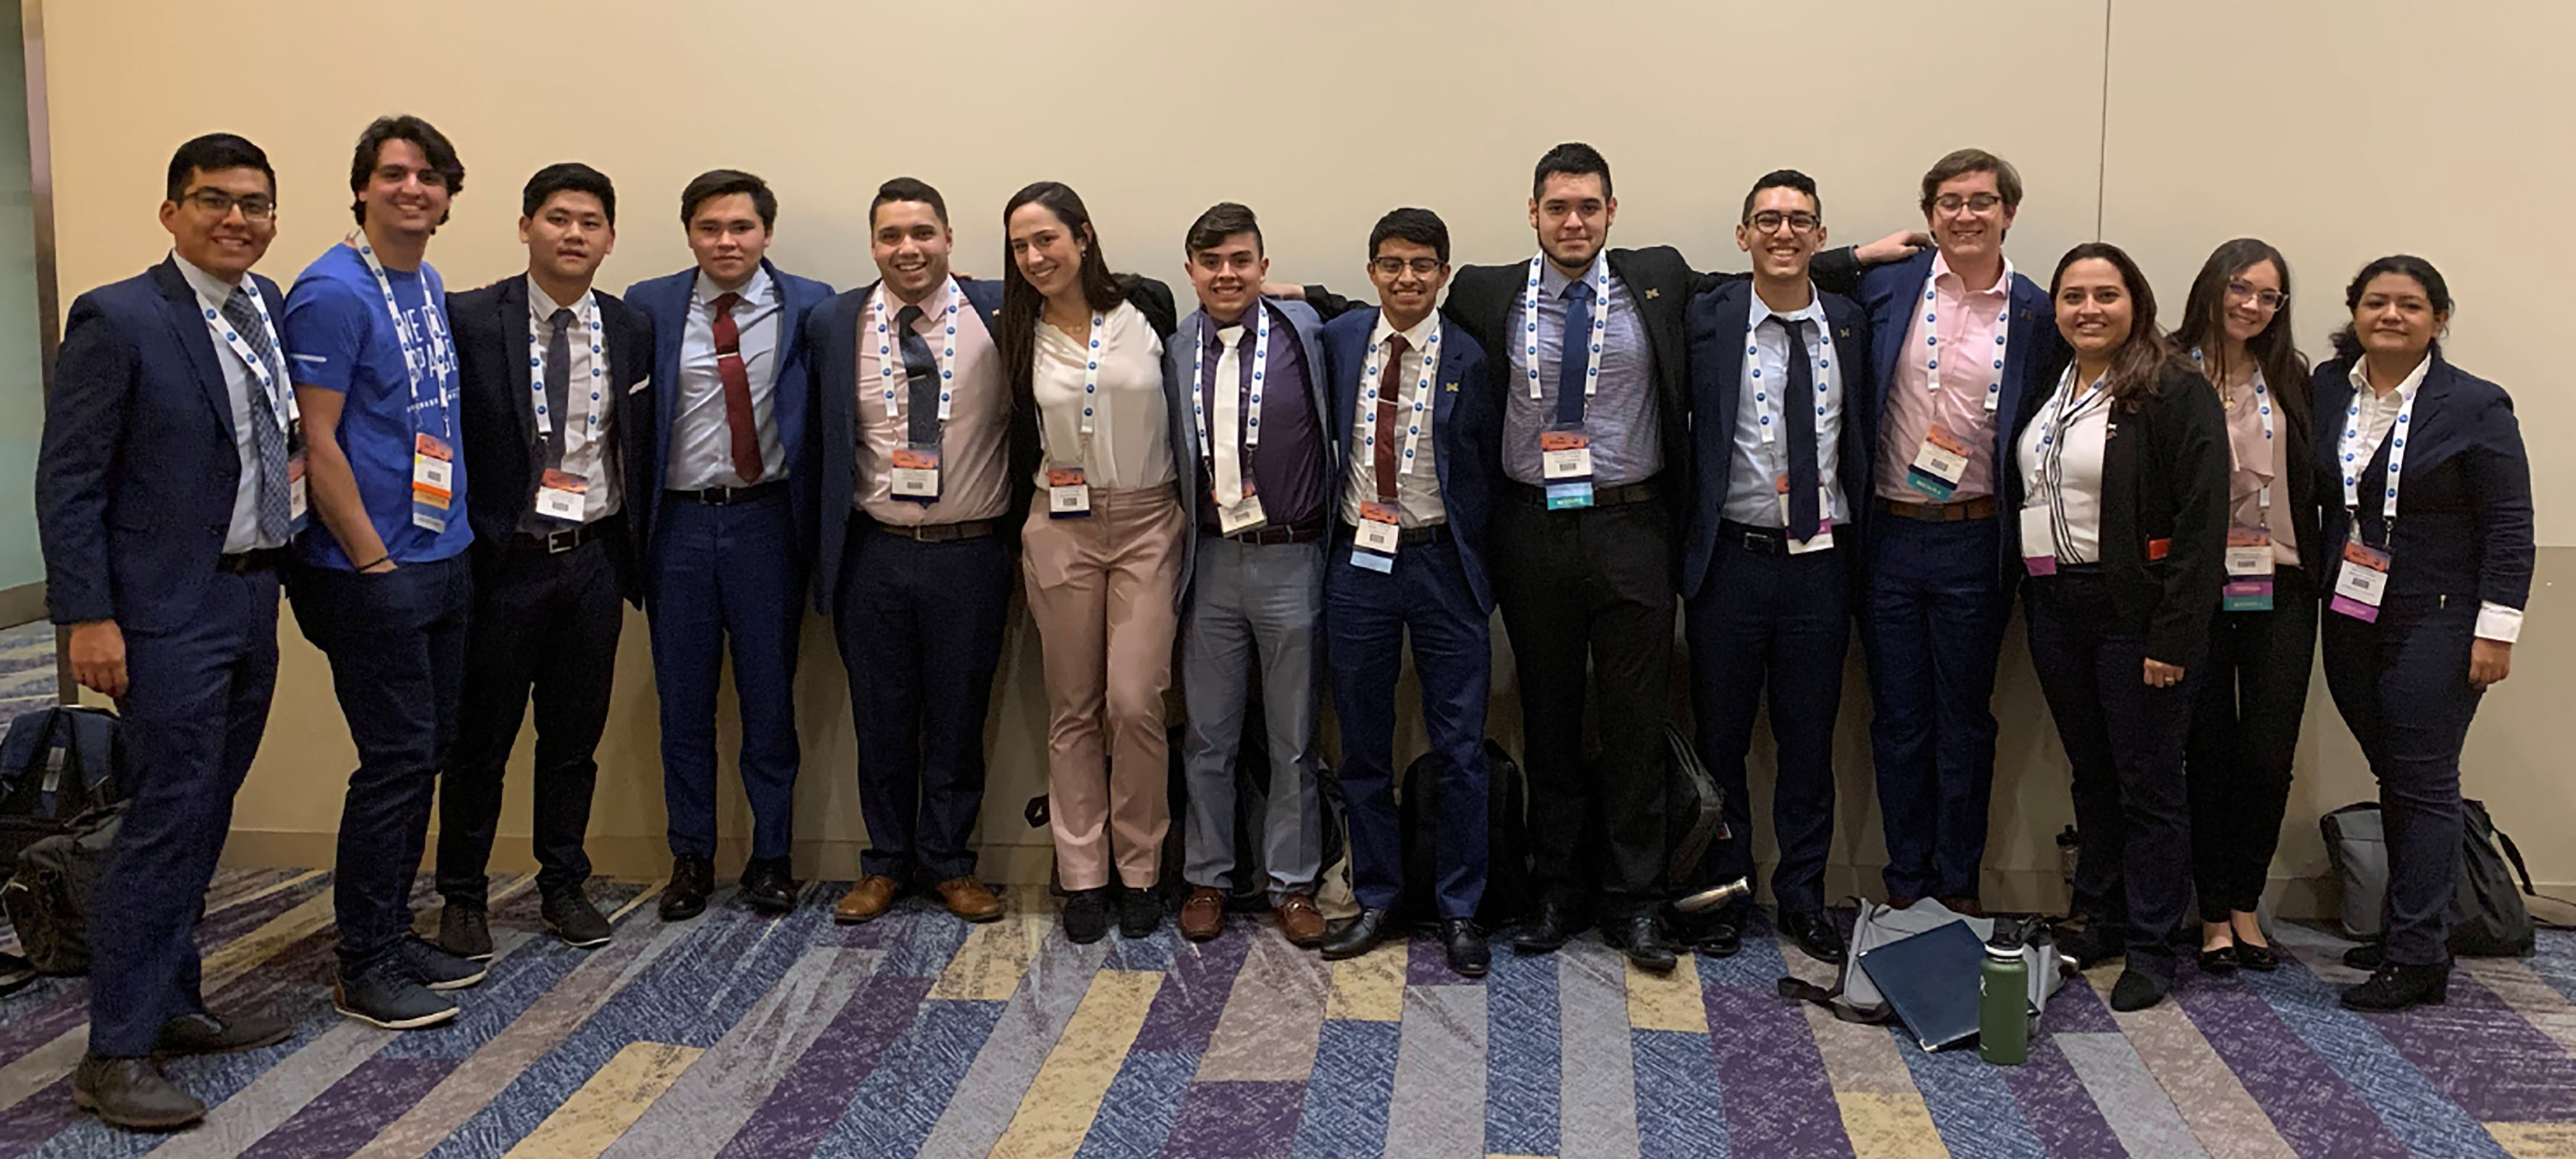 Group photo of SHPE members at National Convention 2019.